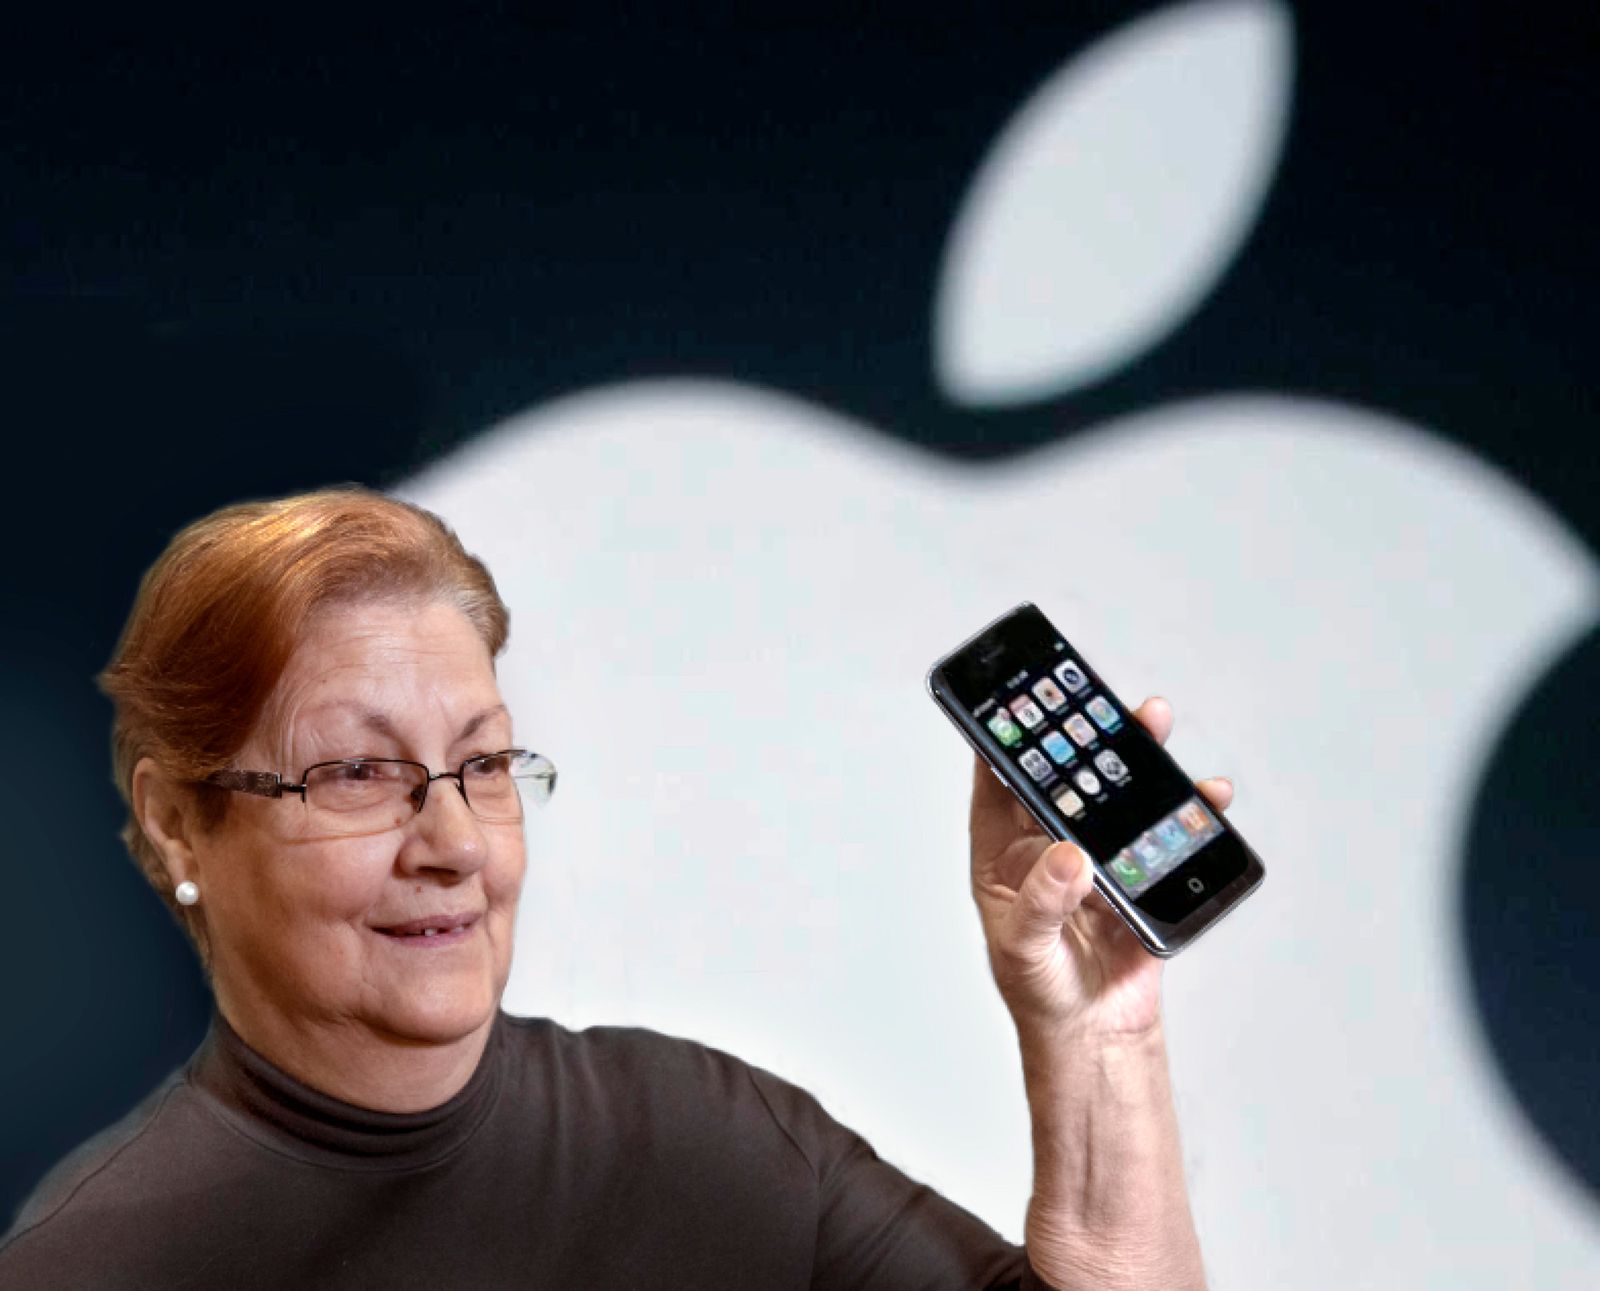 © Ana Amado - Steph Jobs introduces the first iPhone. 2007.